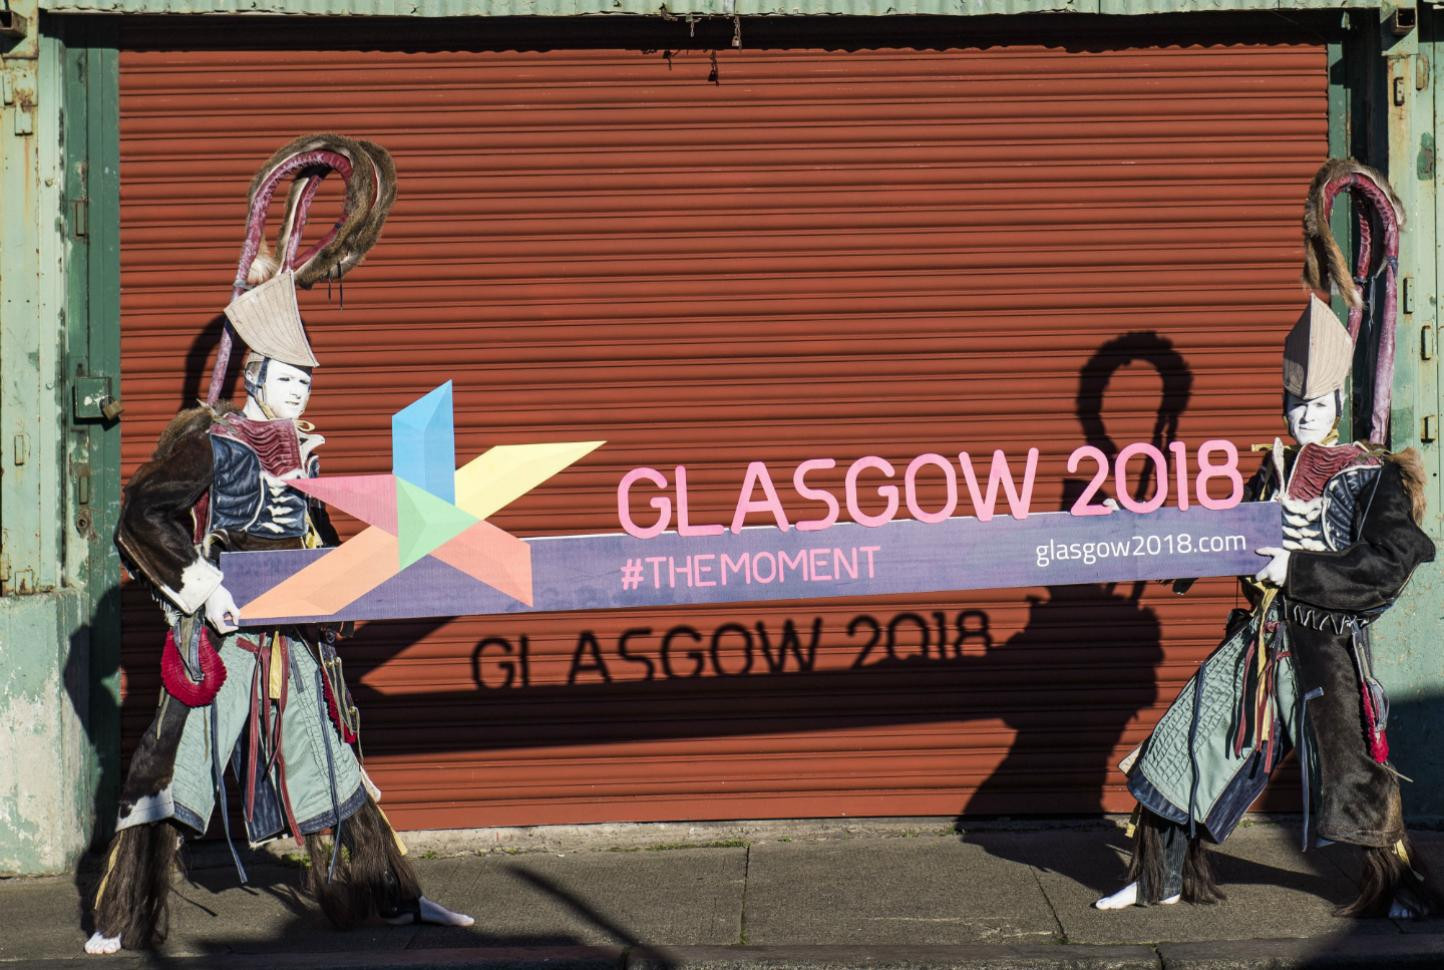 The cultural programme is aimed at showcasing music, visual art, street art, dance, theatre and digital art ©Glasgow 2018